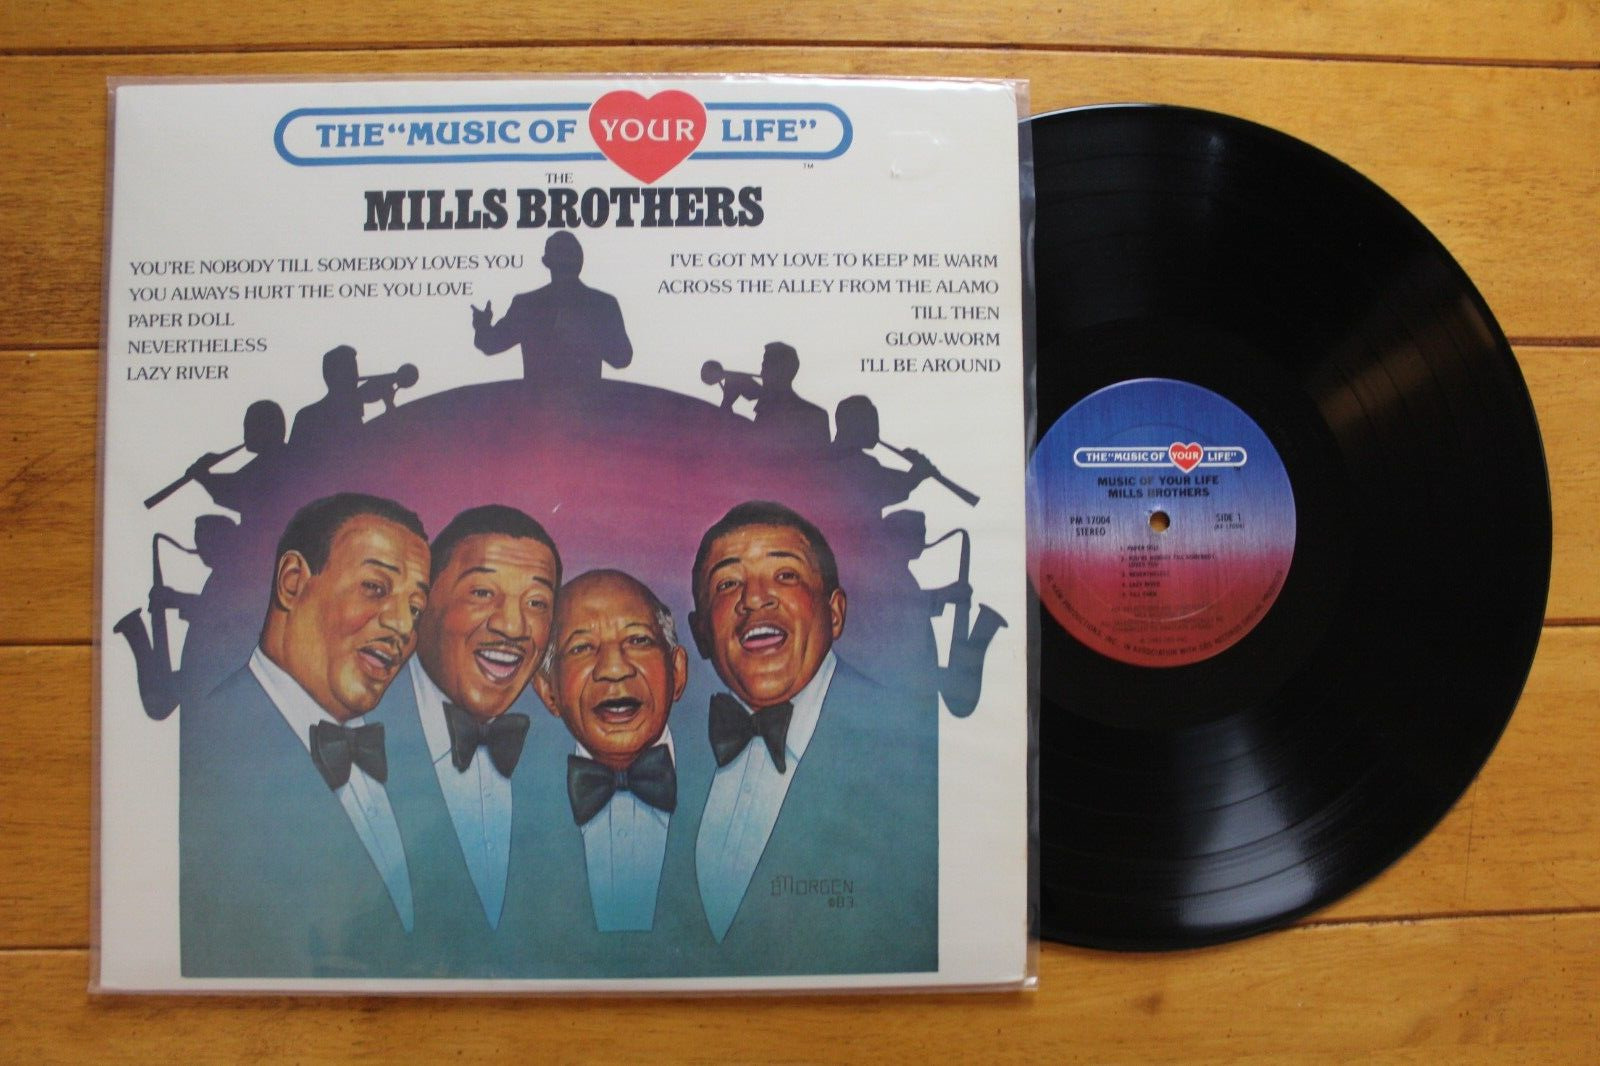 THE MILLS BROTHERS LP 12" RECORD "THE MUSIC OF YOUR LIFE" 1983 CBS VG++ [40]